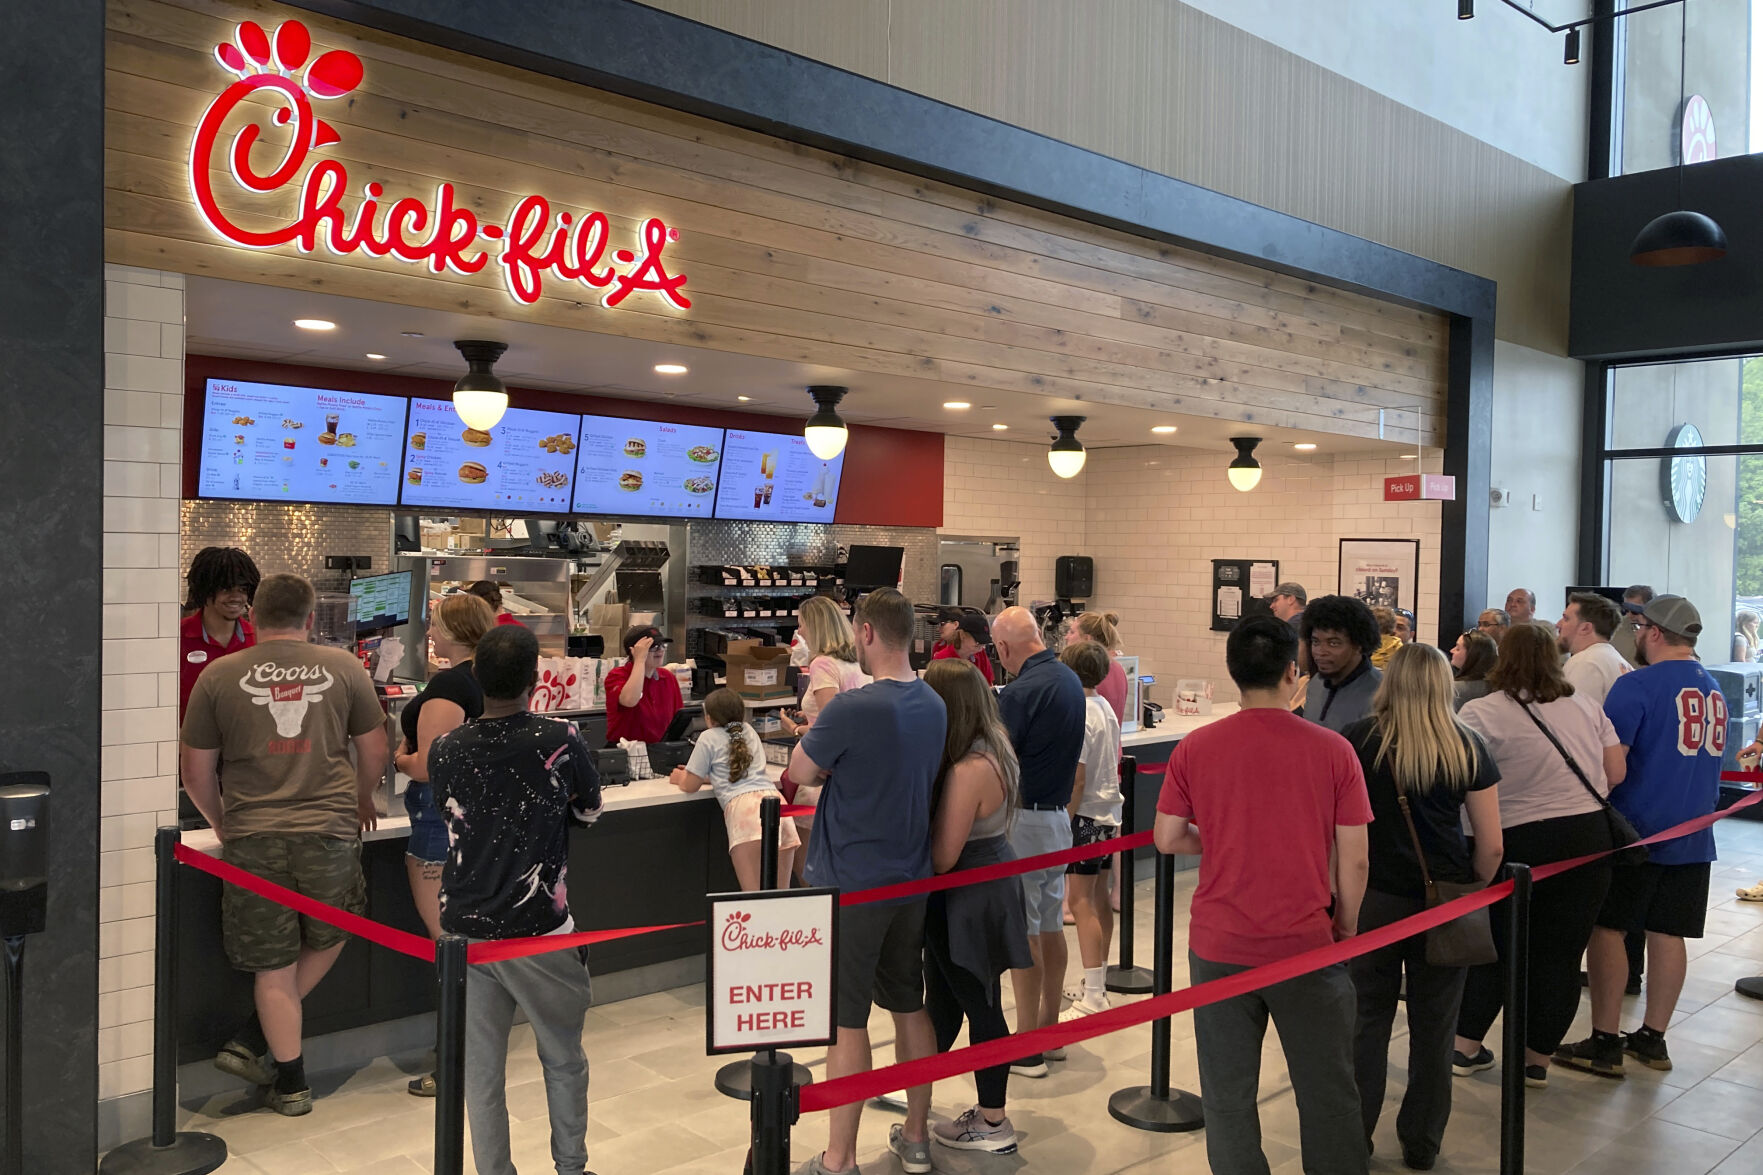 <p>File - People line up to order fast food from a Chick-fil-A restaurant at the Iroquois Travel Plaza rest stop on the New York State Thruway in Little Falls, New York, on June 30, 2023. On Tuesday, the Labor Department issues its report on inflation at the consumer level in October. (AP Photo/Ted Shaffrey, File)</p>   PHOTO CREDIT: Ted Shaffrey - staff, ASSOCIATED PRESS